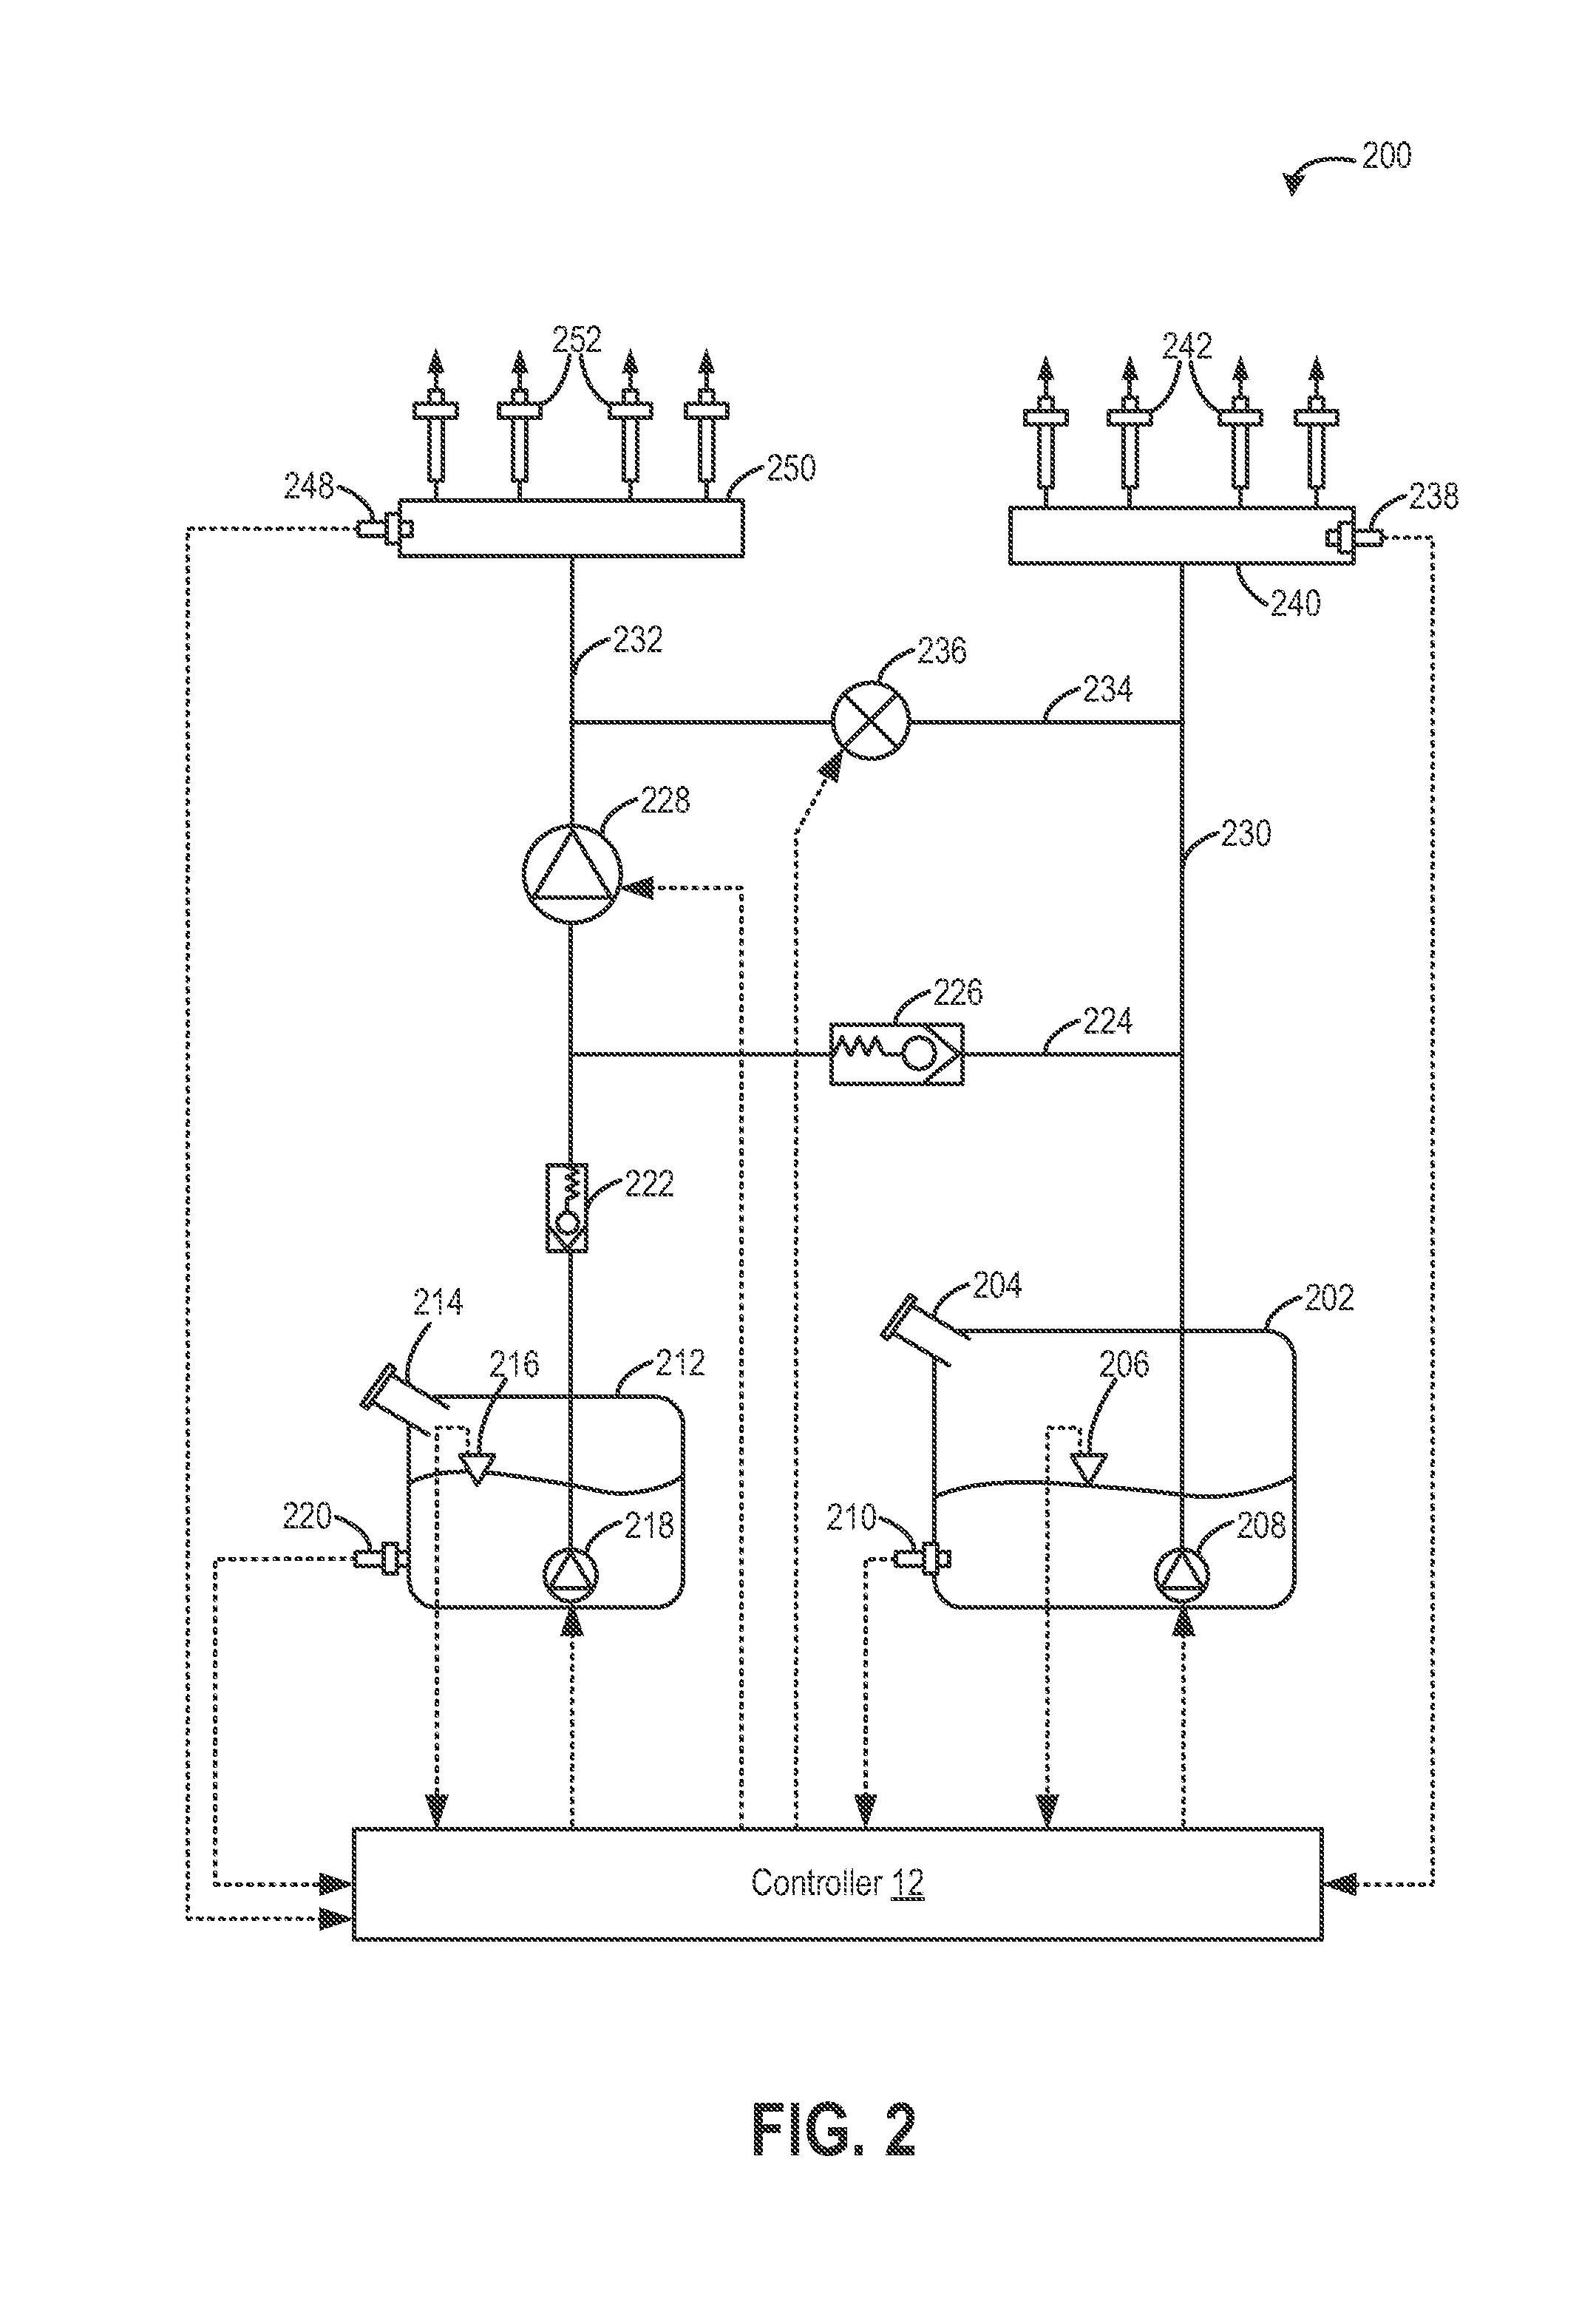 Fuel system for a multi-fuel engine